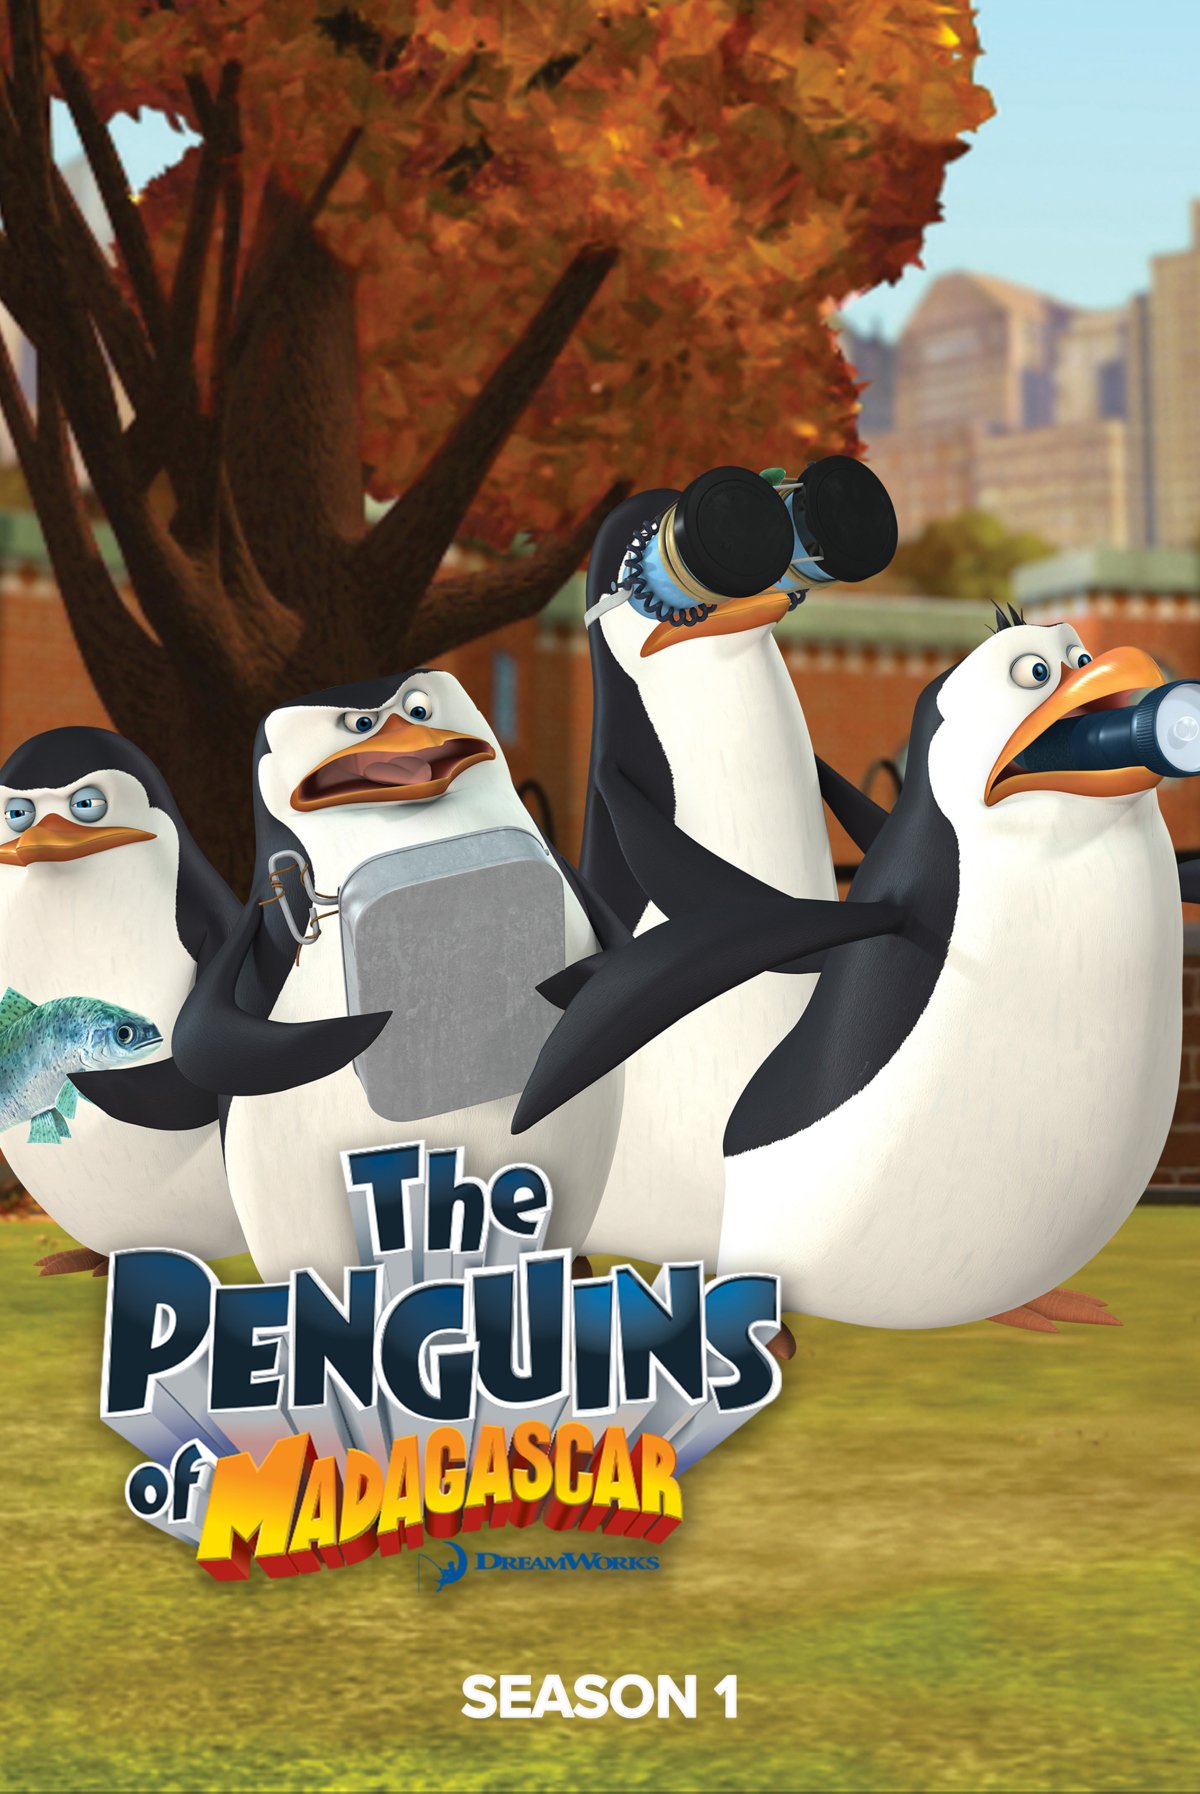 Now Player - The Penguins of Madagascar S1